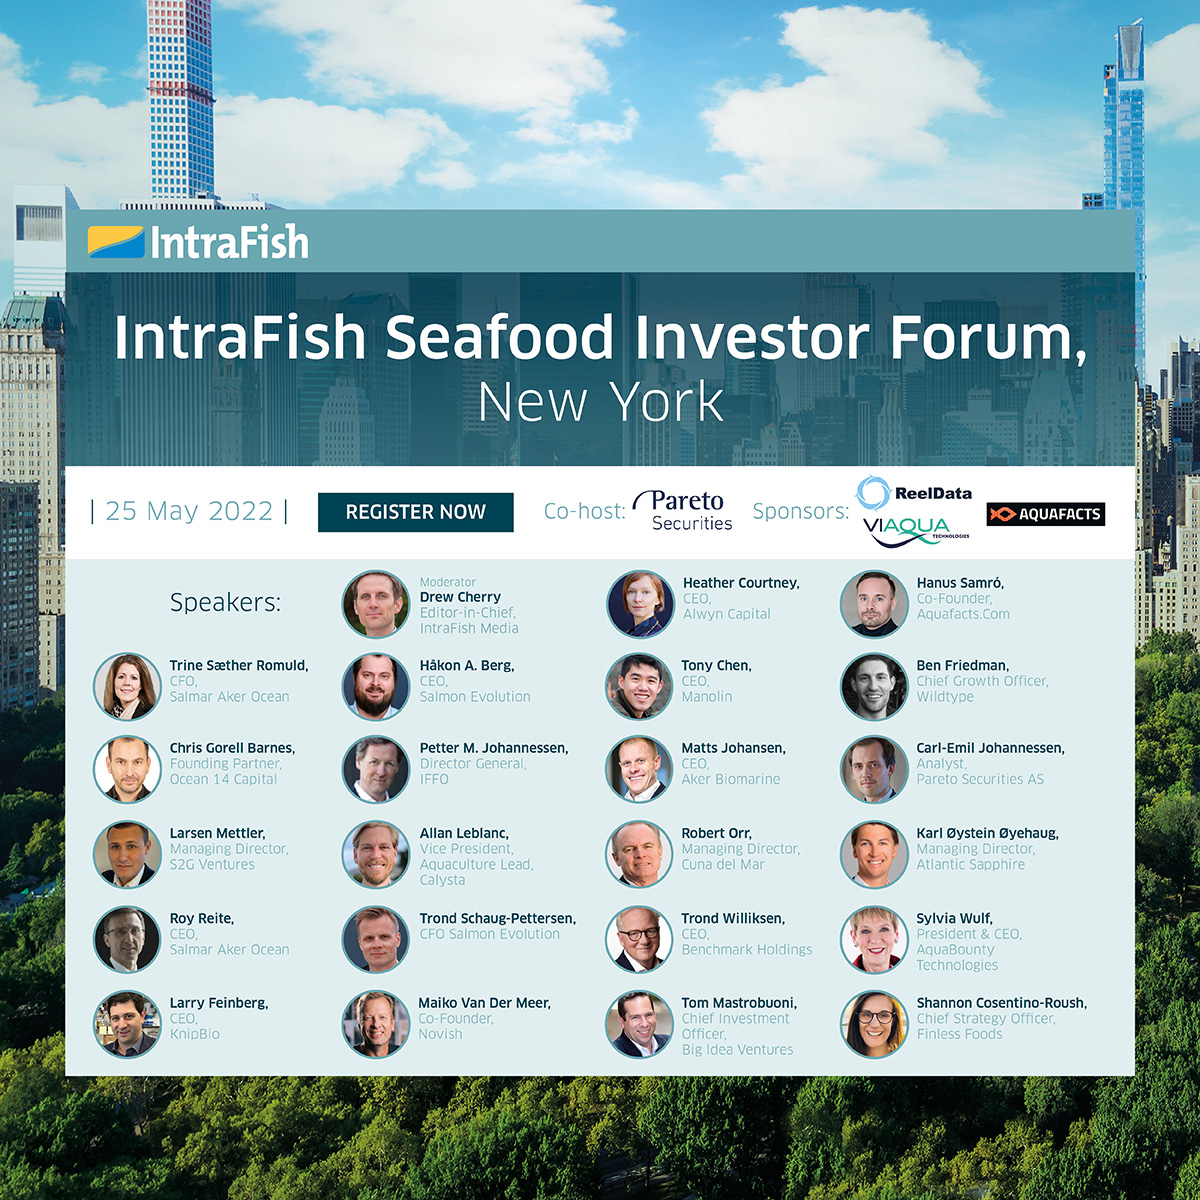 ONE WEEK TO GO! TICKETS ARE LIMITED! 

This is your key destination to surrounded yourself with leaders in the seafood community in the heart of New York. Don't miss out on the chance to be part of it - make sure you're in the room

👉 Register Now: https://t.co/6RBKKRbeM7 https://t.co/fVFaUgT4NN